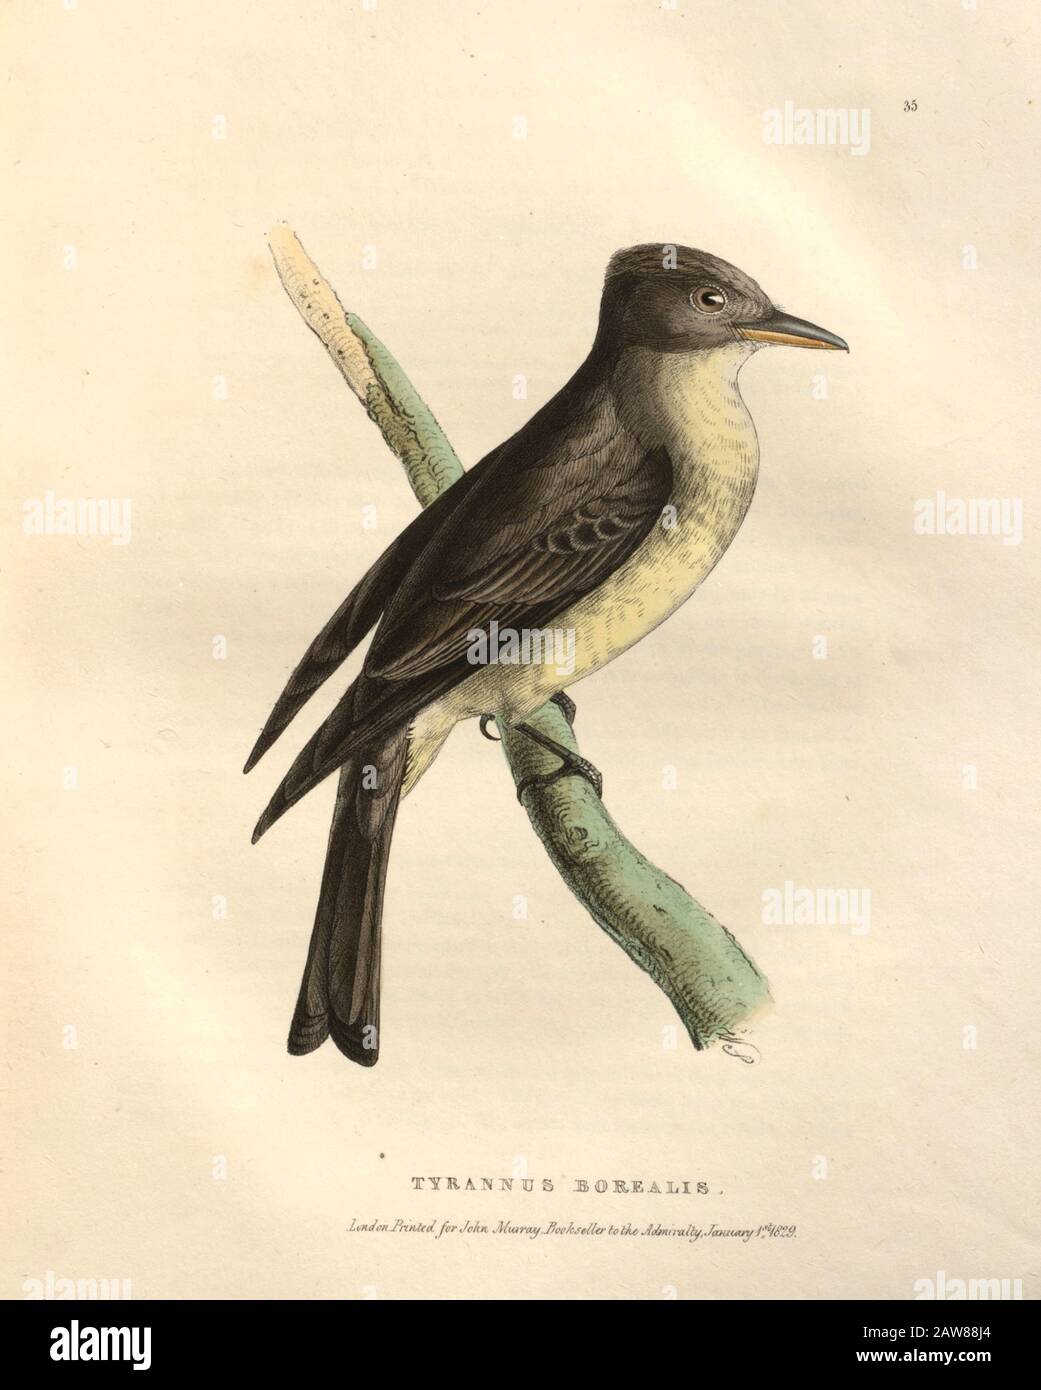 Tyrannus borealis (Northern Tyrant),  color plate of North American birds from Fauna boreali-americana; or, The zoology of the northern parts of British America, containing descriptions of the objects of natural history collected on the late northern land expeditions under command of Capt. Sir John Franklin by Richardson, John, Sir, 1787-1865 Published 1829 Stock Photo